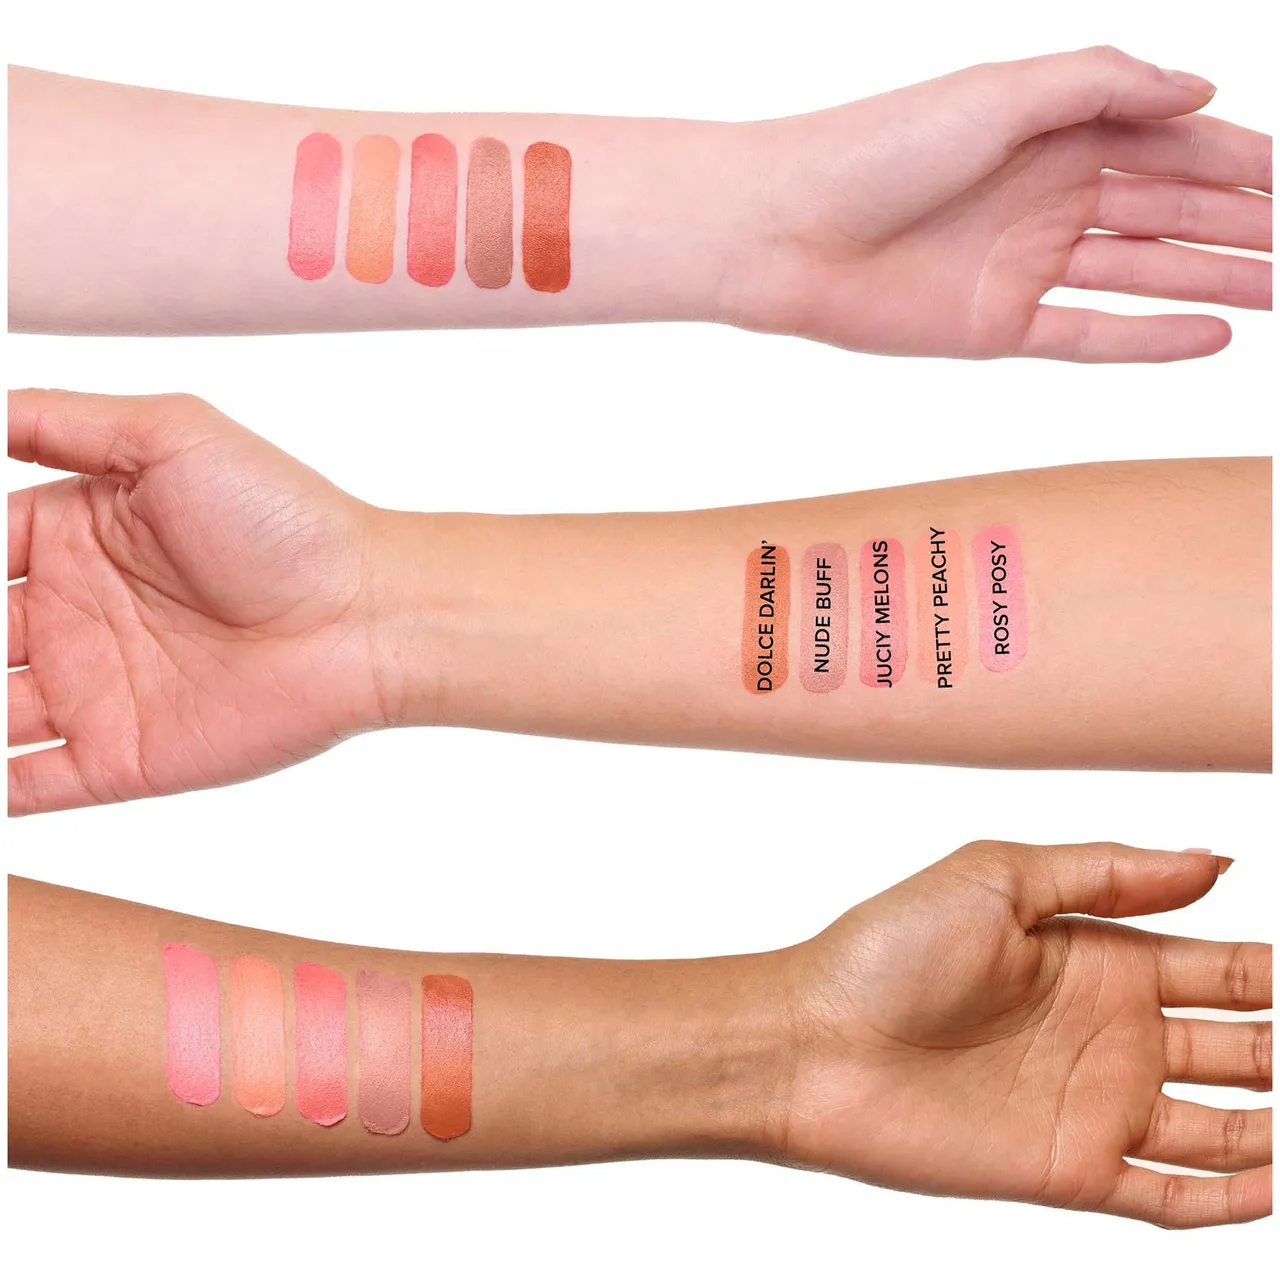 NUDESTIX Nudies Matte Lux All Over Face Blush Colour 7g (Various Shades) - Juicy Melons